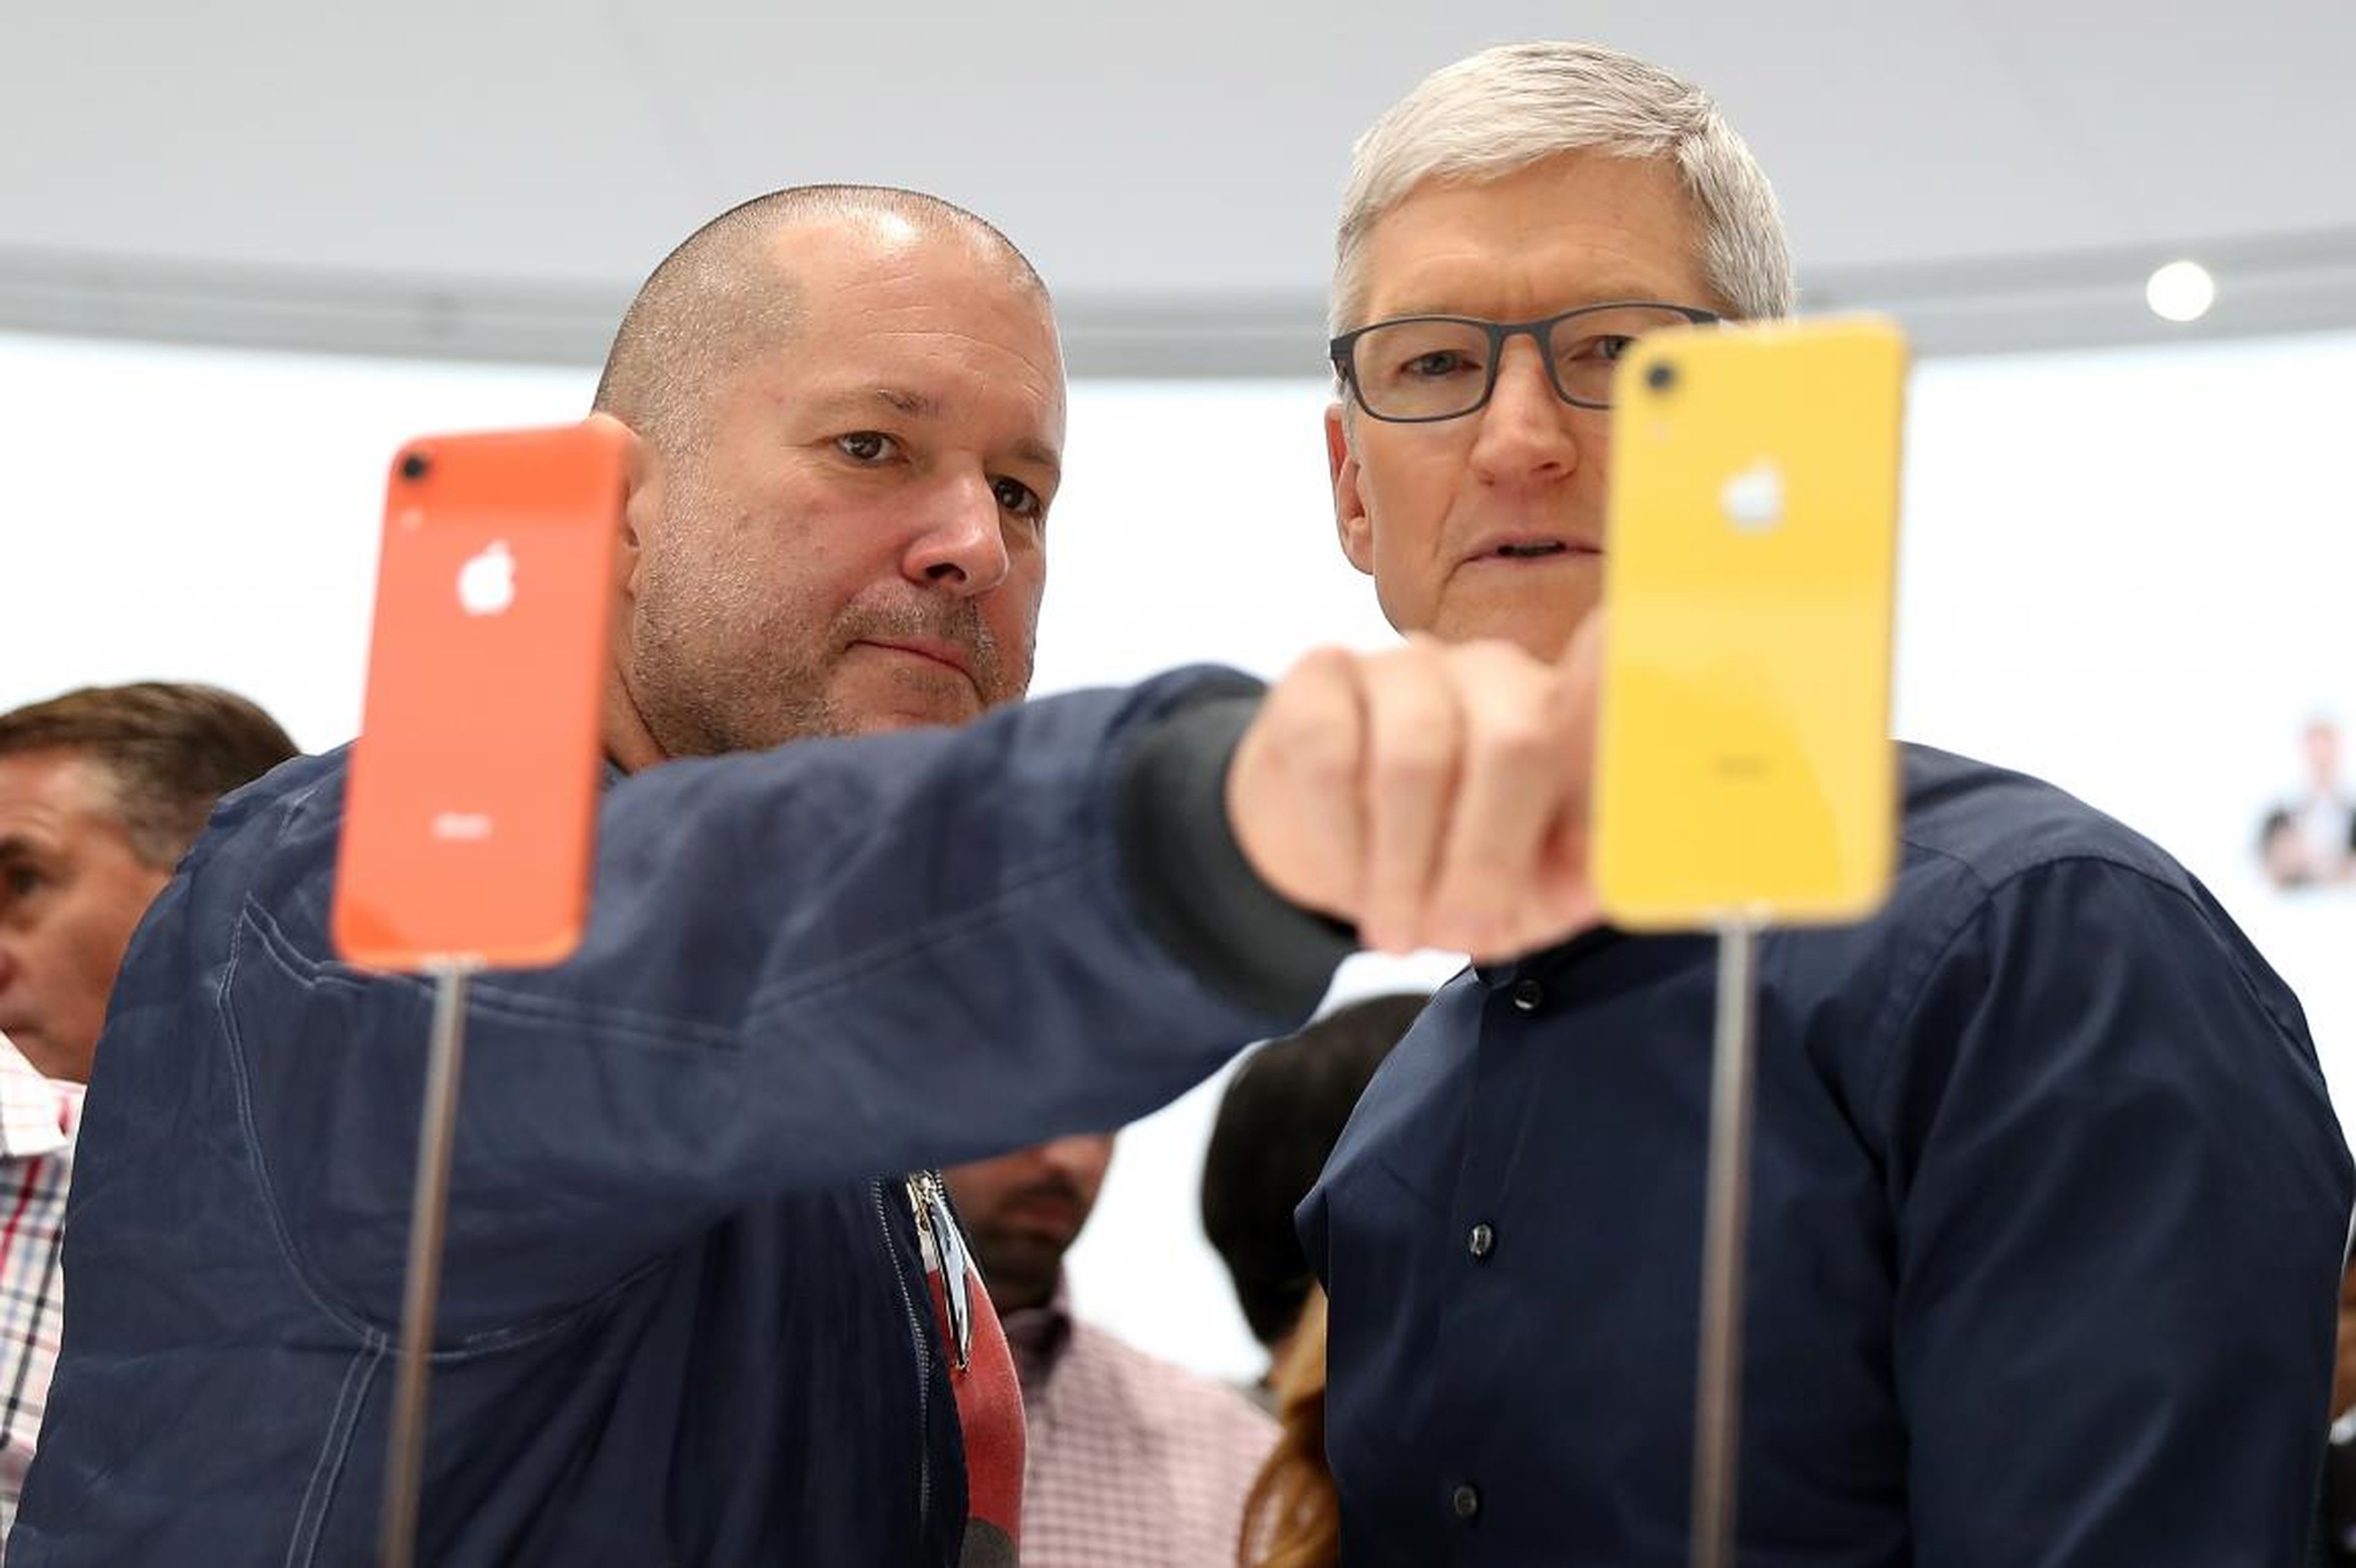 Apple's newest phone is expected to have a 6.1-inch screen.